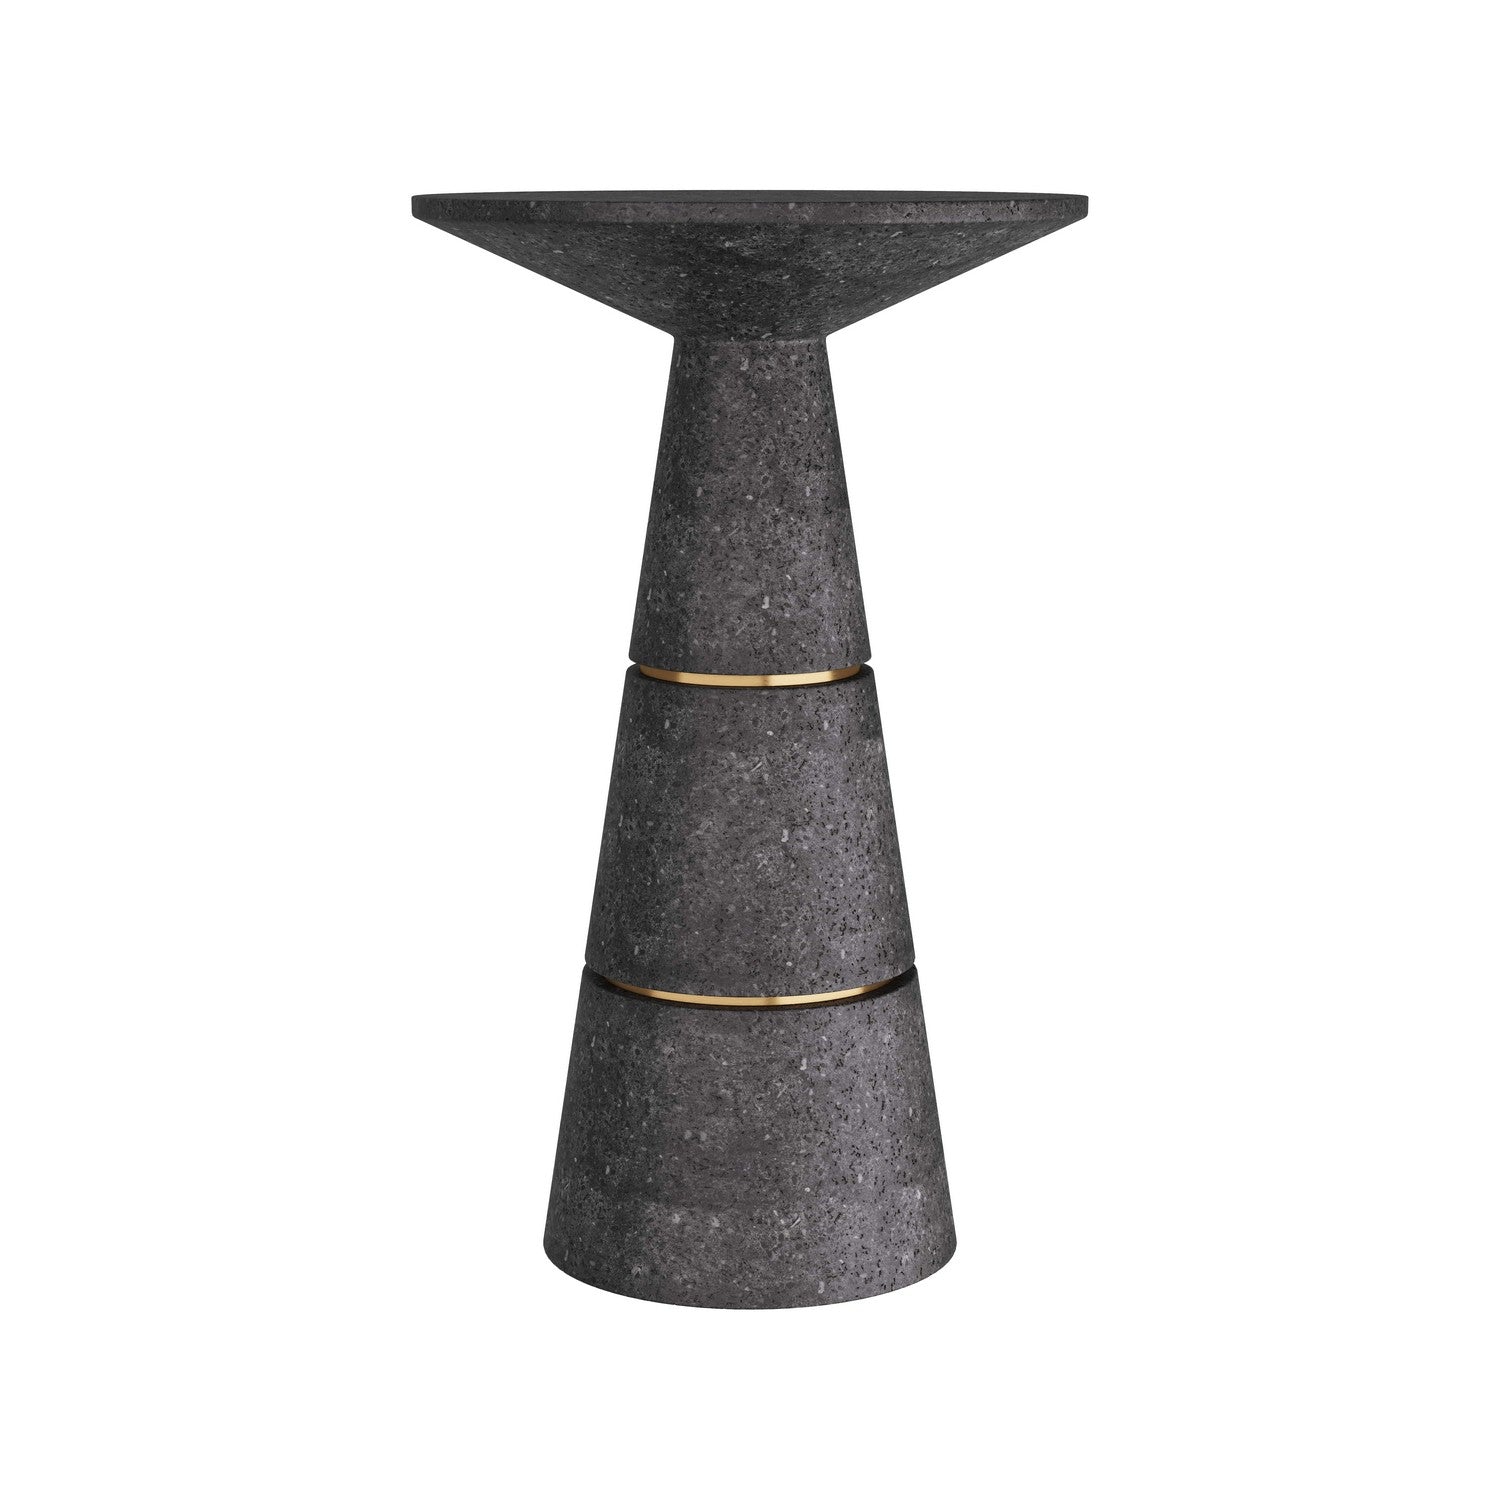 Accent Table from the Verwall collection in Charcoal finish